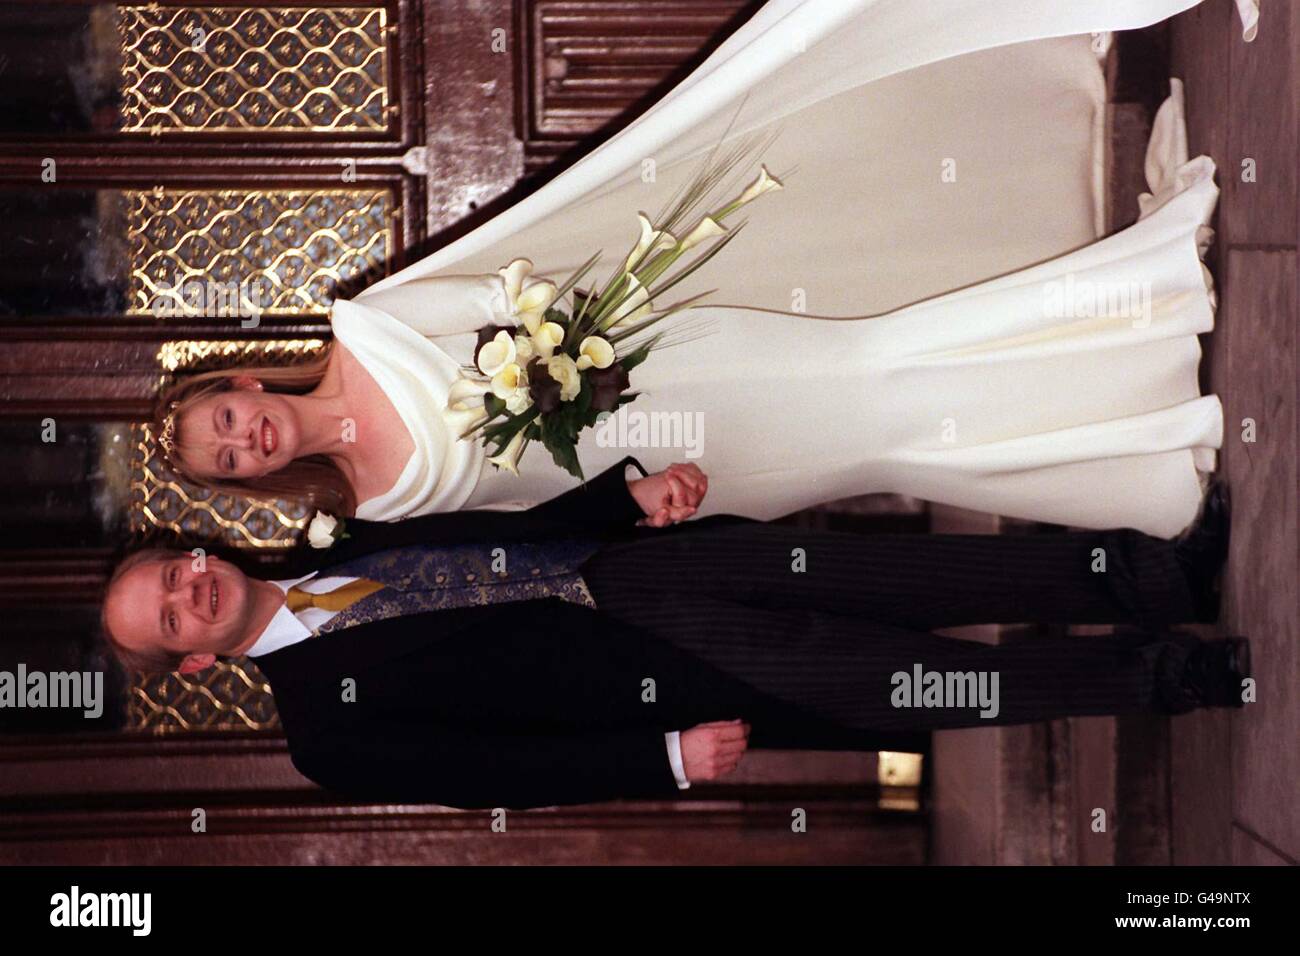 Conservative Party leader William Hague and his new bride, Ffion Jenkins, pose formally for the benefit of the media on the steps of the St Stephens entrance to the House of Commons following their wedding ceremony. * 8/6/01: Hague dramatically announced that he was to quit as Tory leader after his party's heavy election defeat. In a keenly awaited statement outside Conservative Central Office, Hague said he would step down as leader of the party when a successor can be elected. Mr Portillo is likely to be one of the contenders for the position. Stock Photo